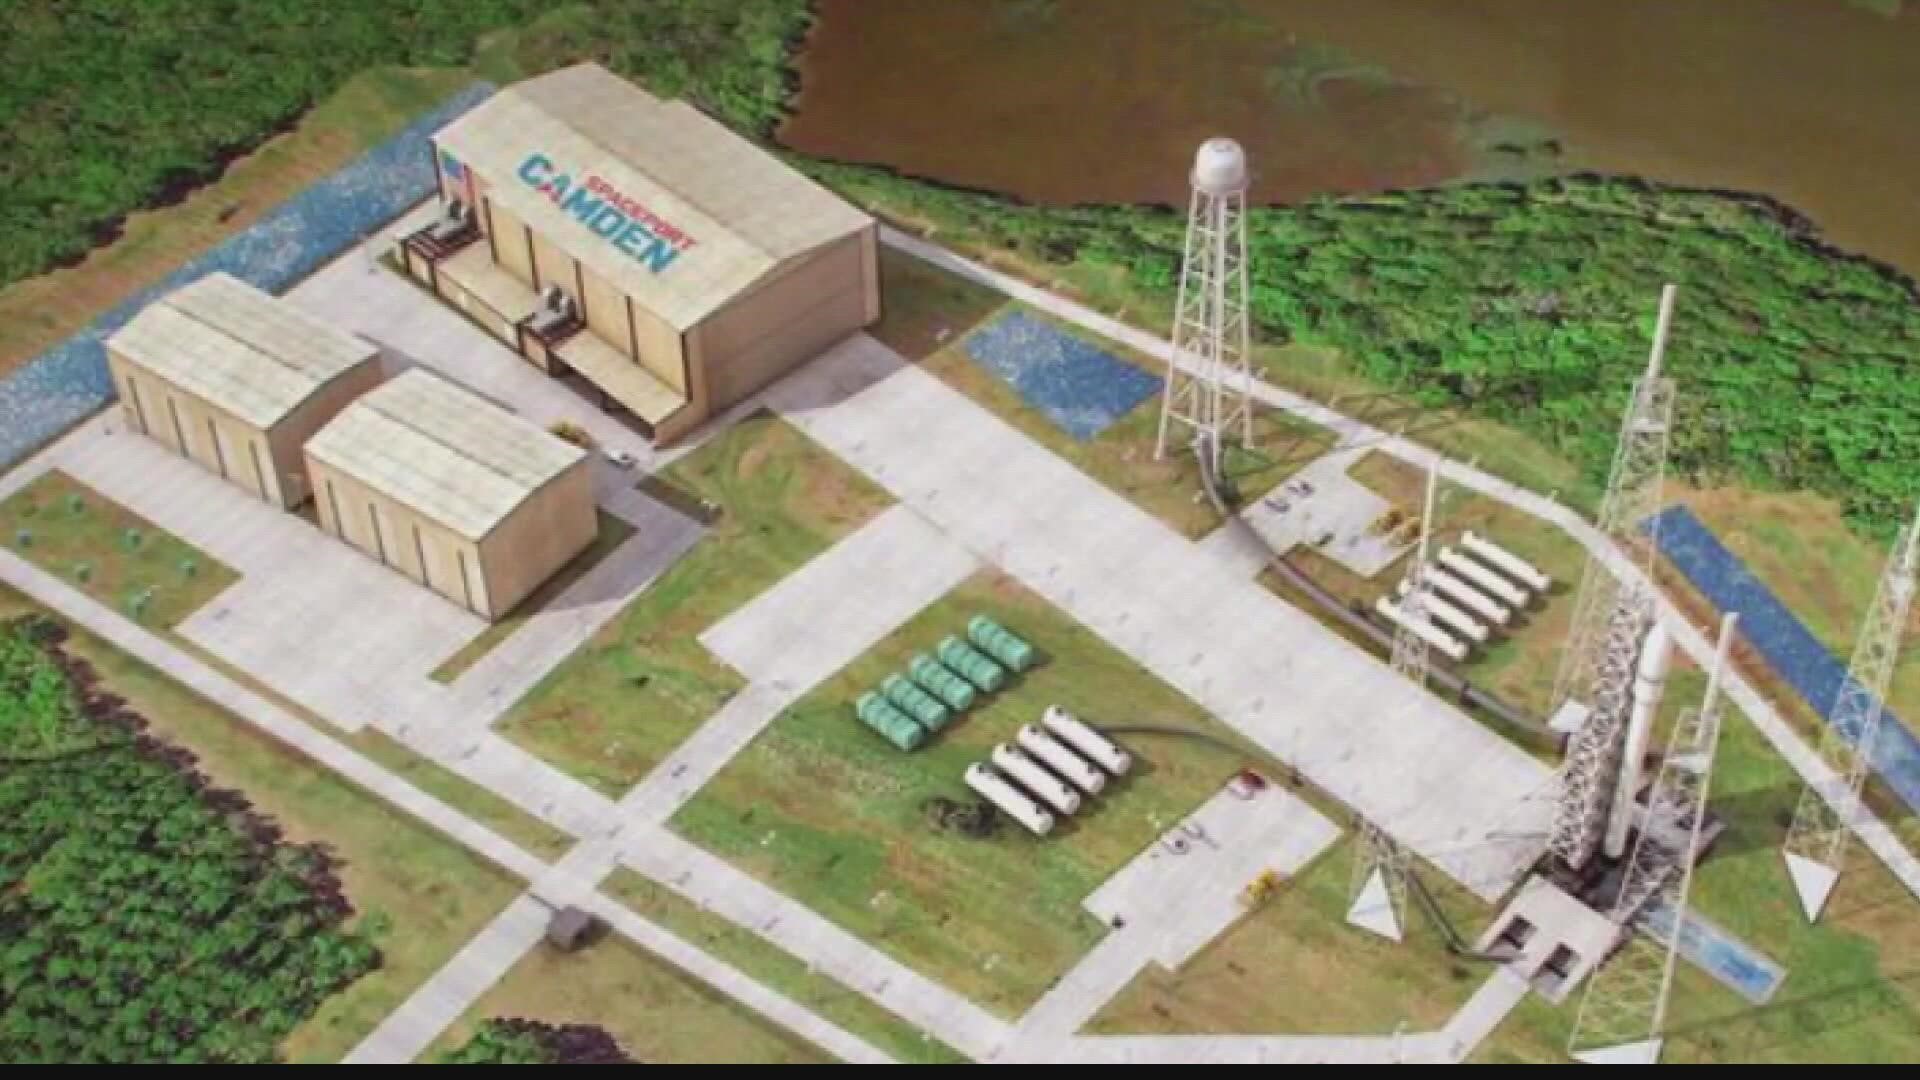 The owner of a large industrial site on the Georgia coast said Thursday that it has ended a longstanding agreement.